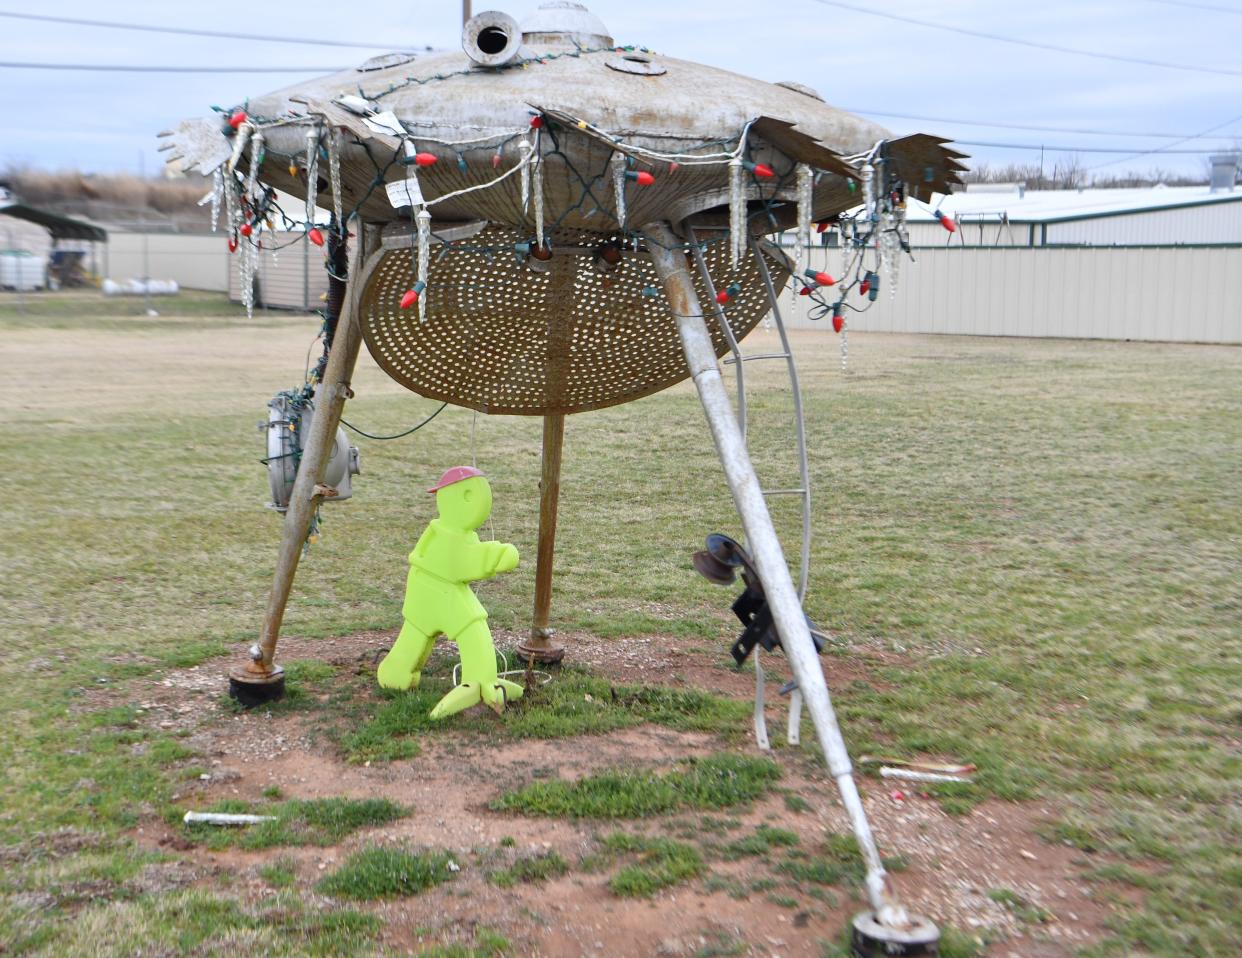 This UFO artwork is nestled off Seymour Highway and Allen Road in Wichita Falls.
(Credit: Naomi Skinner/Times Record News)